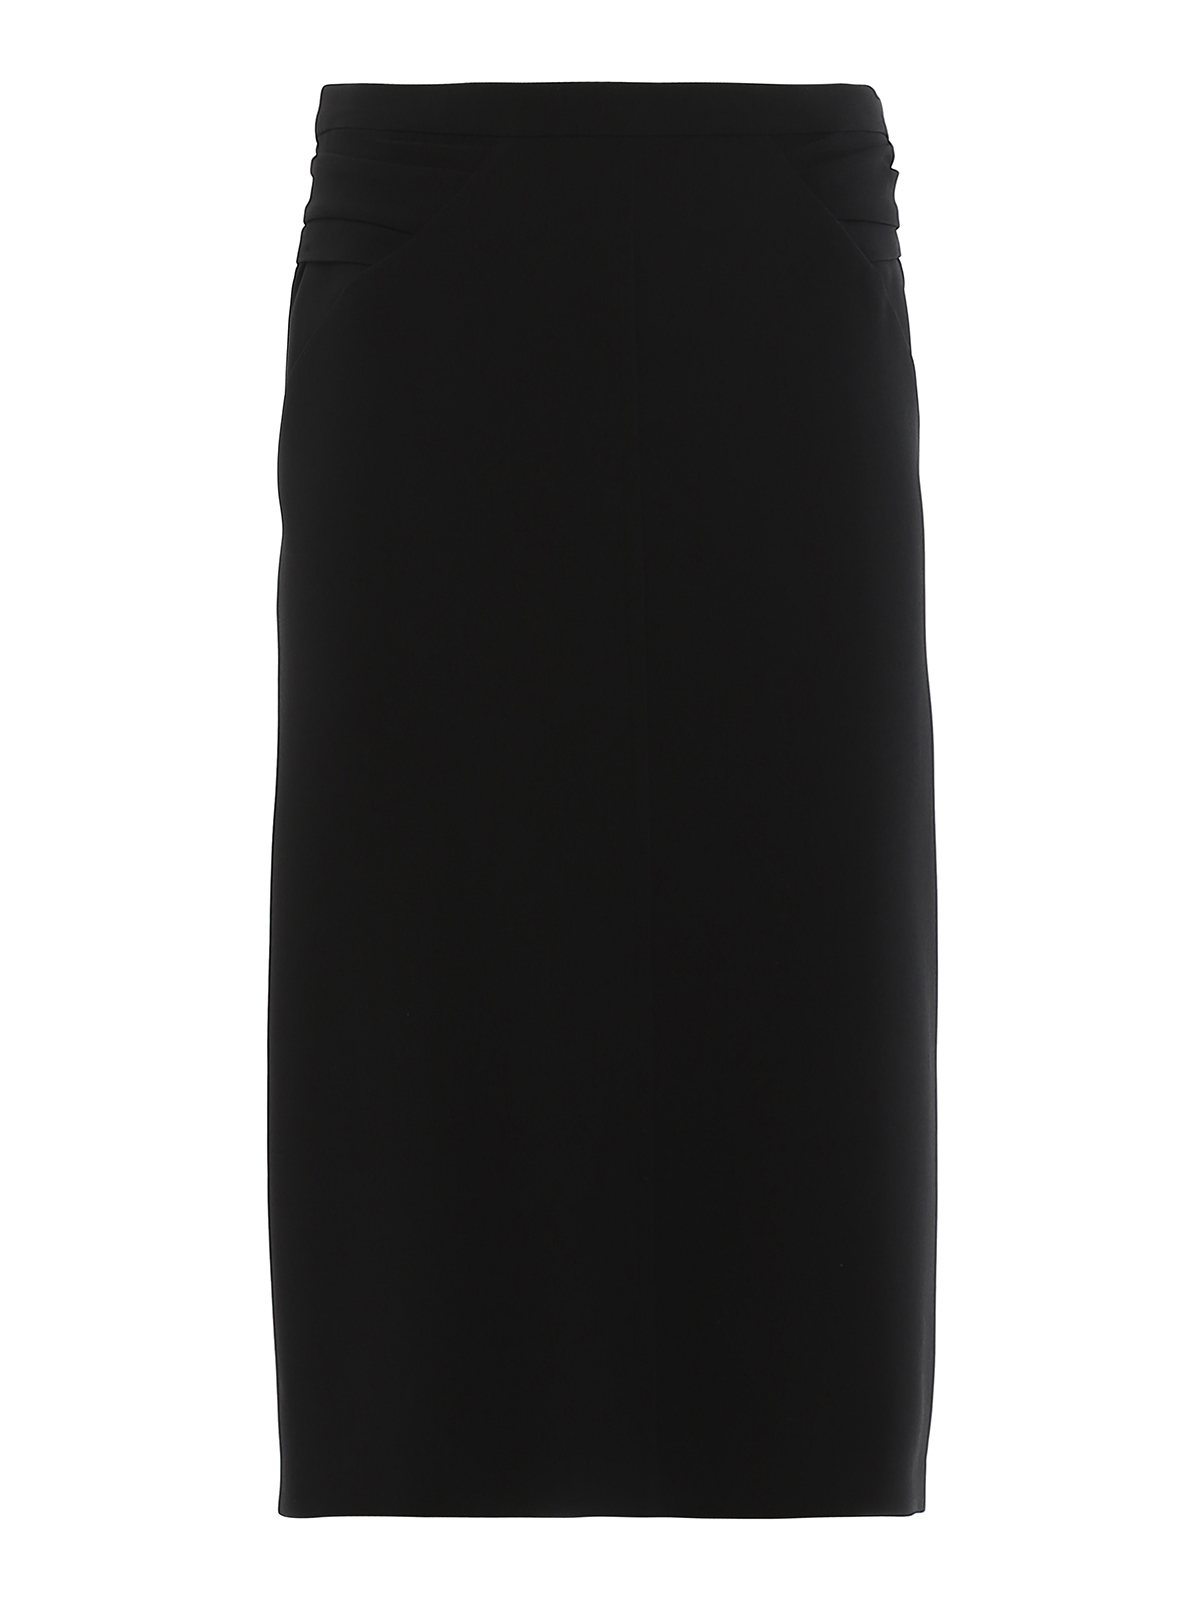 N°21 CADY PENCIL SKIRT WITH ZIP